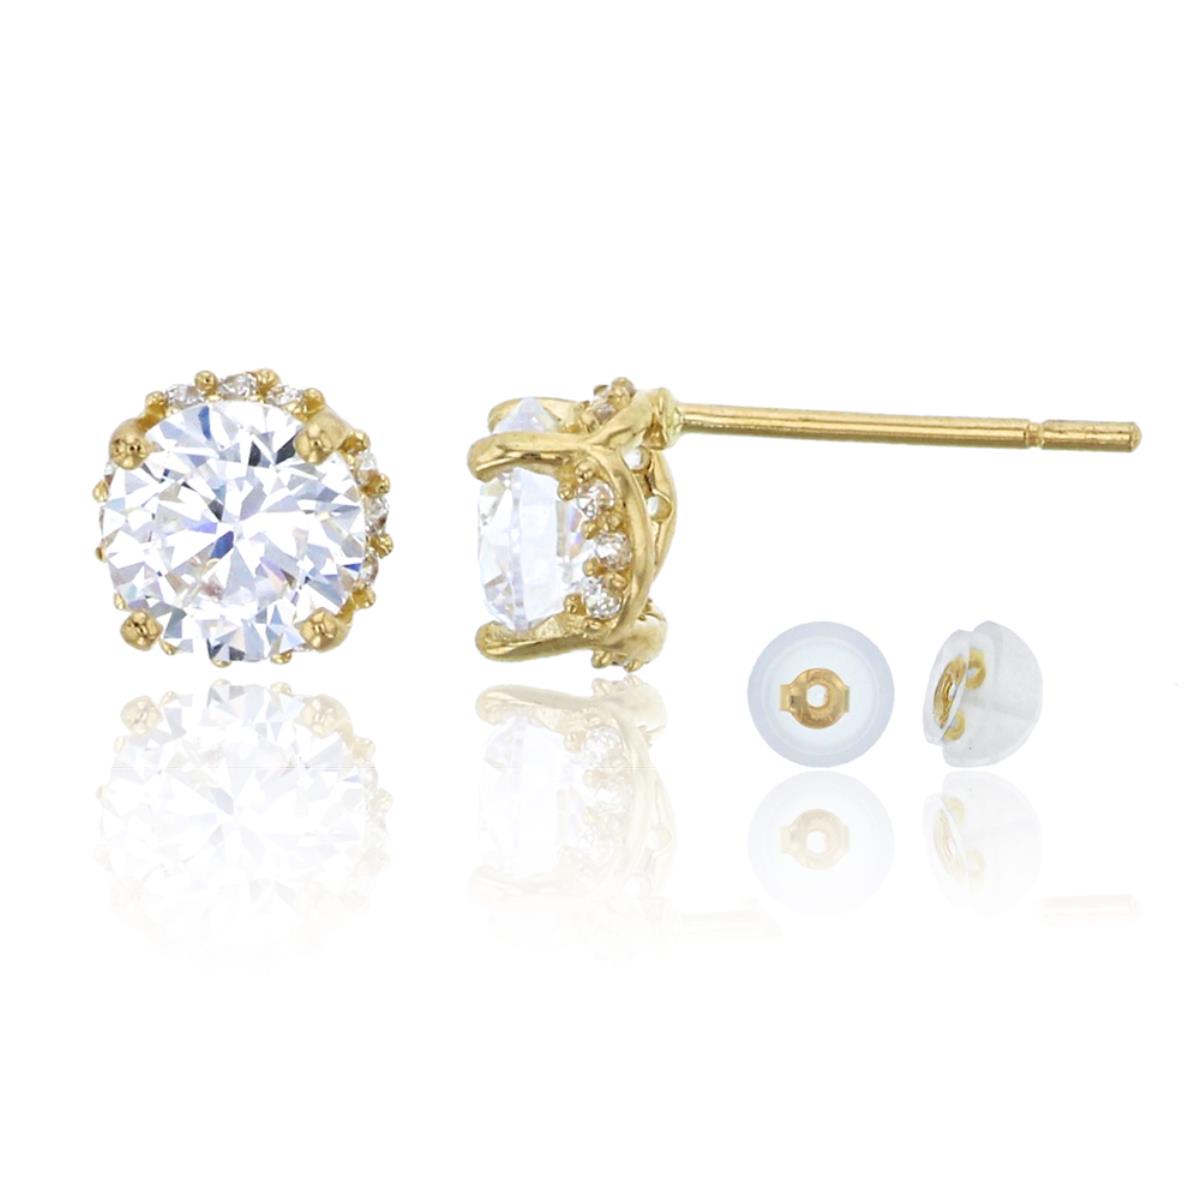 10K Yellow Gold Prong 5mm Round Cut CZ Stud Earring & 10K Silicone Back